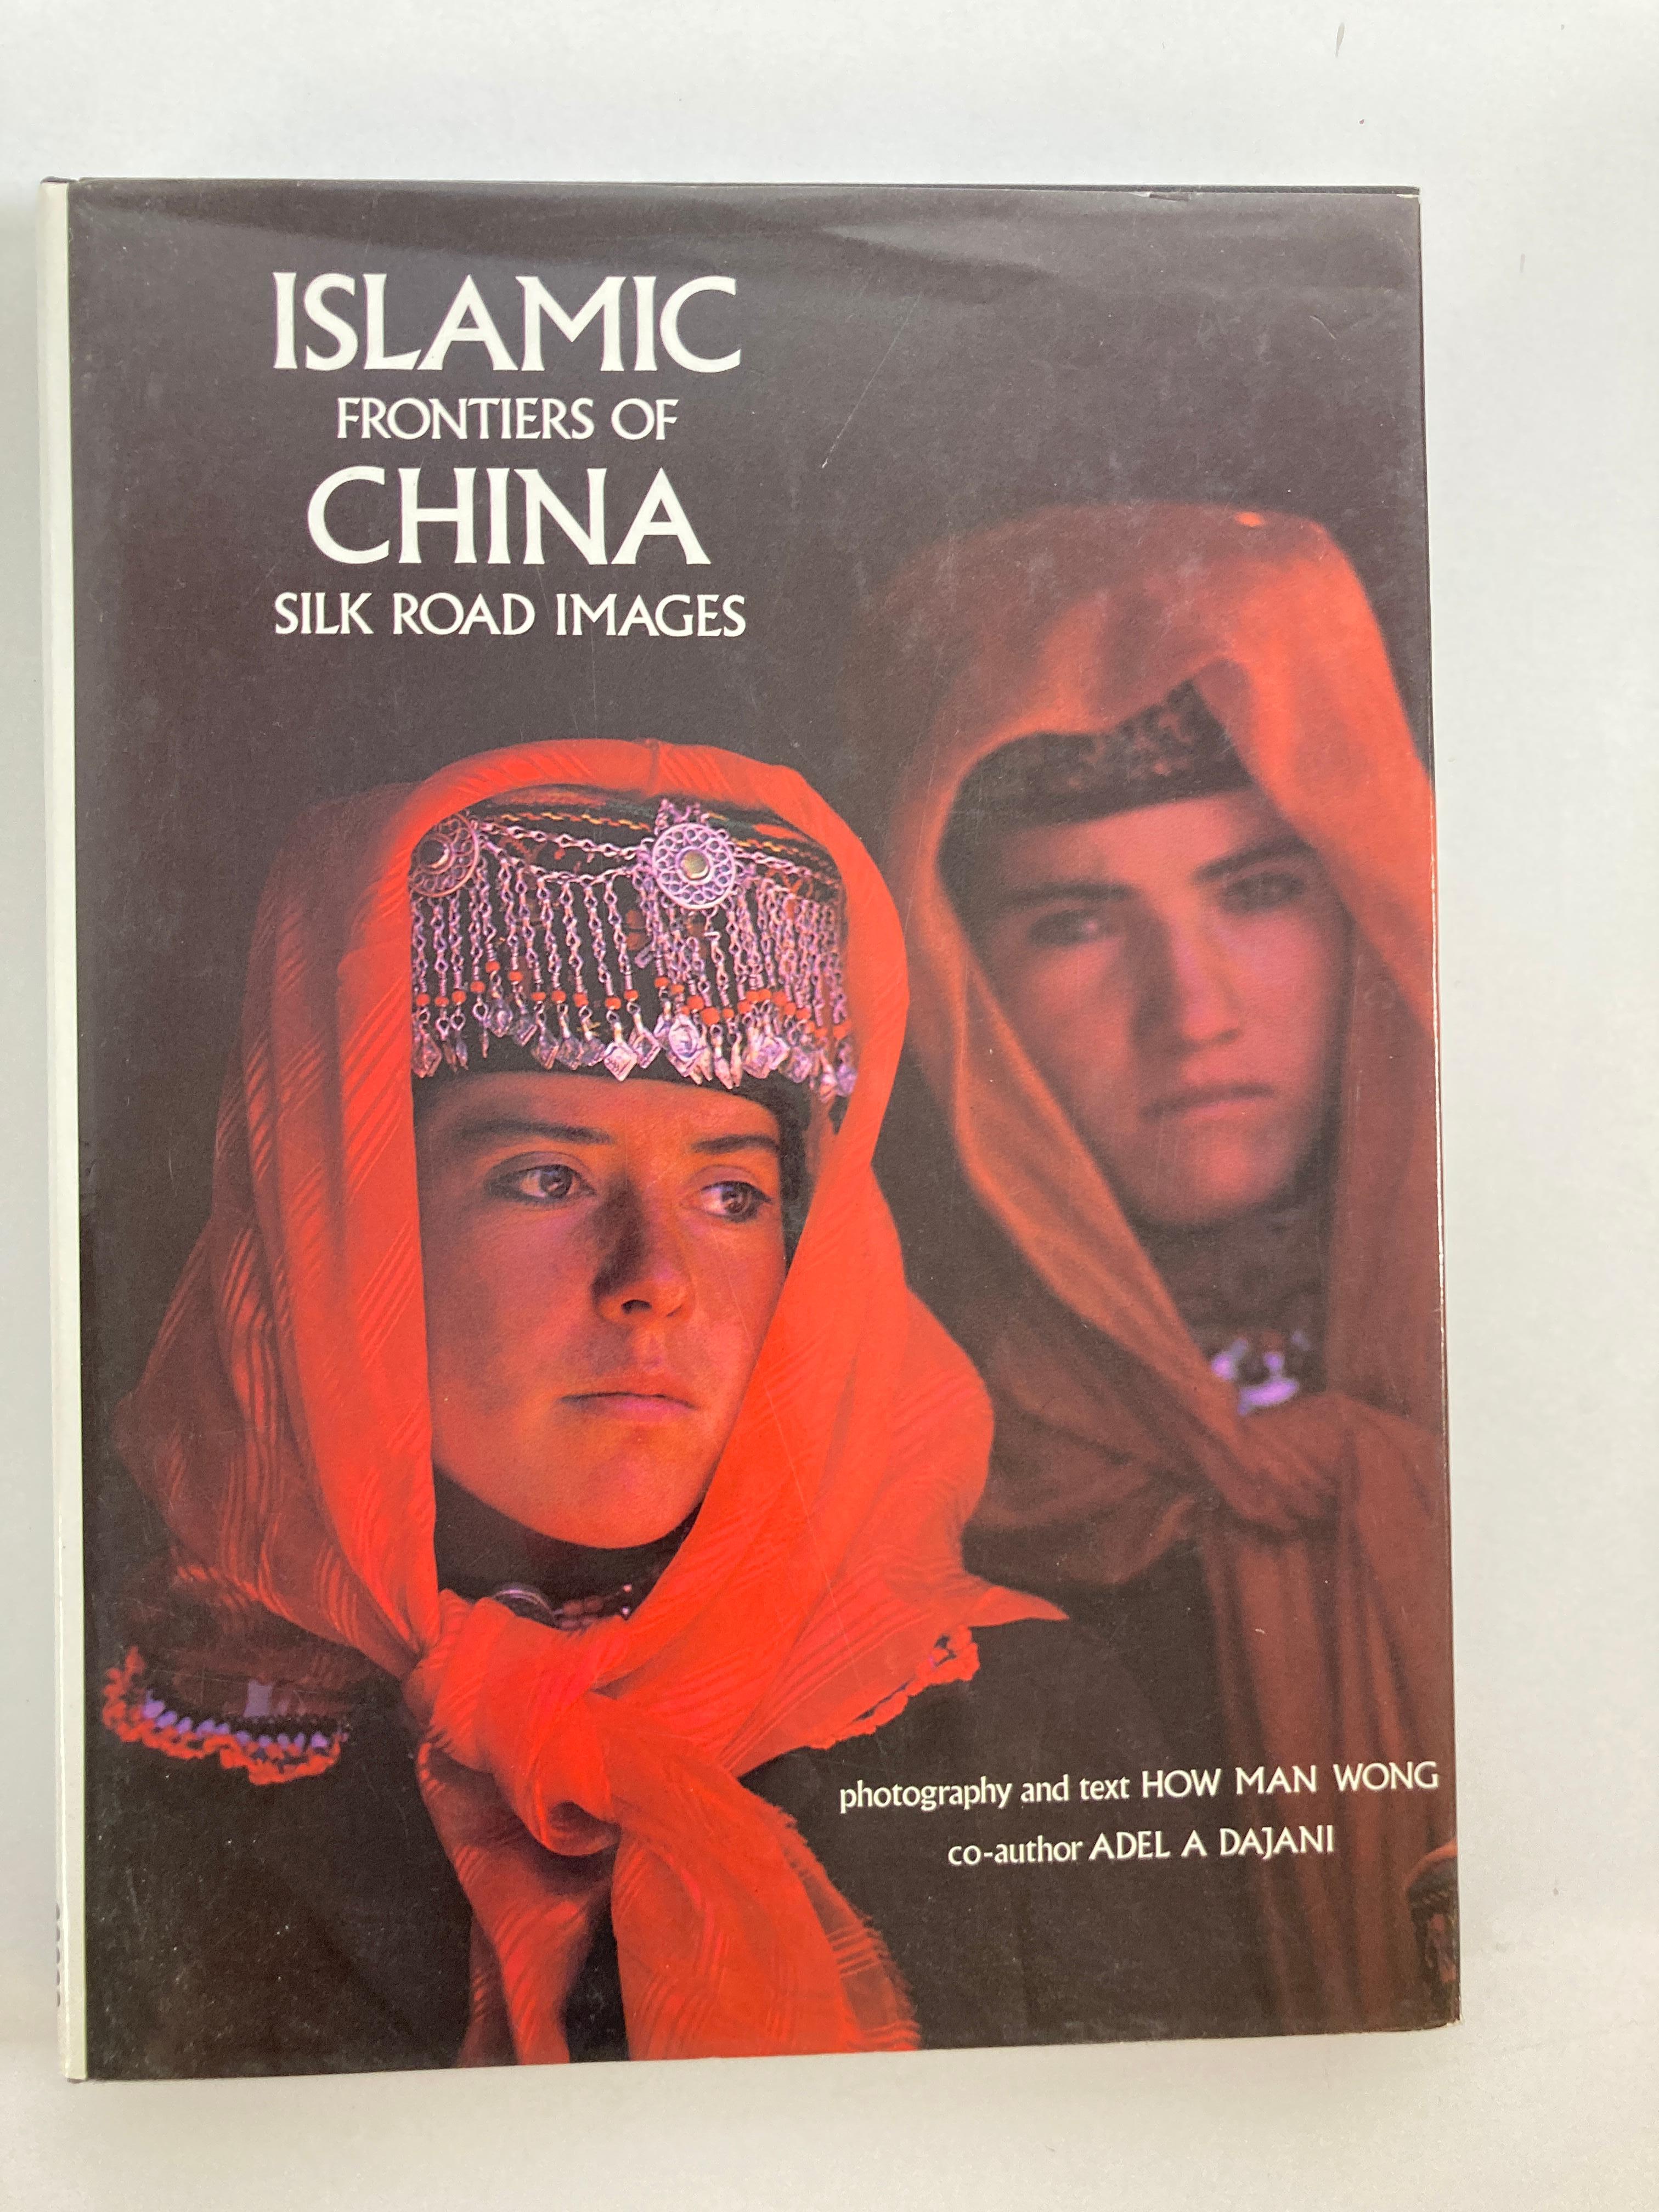 Islamic Frontiers Of China: Silk Road Images.
Hardcover – December 1, 1990
Language: : English
Hardcover : 144 pages
By Man, Wong How; Dajani, Adel Awni.
Hardcover 1st Ed in dust jacket 
This is a beautiful collector coffee table or library